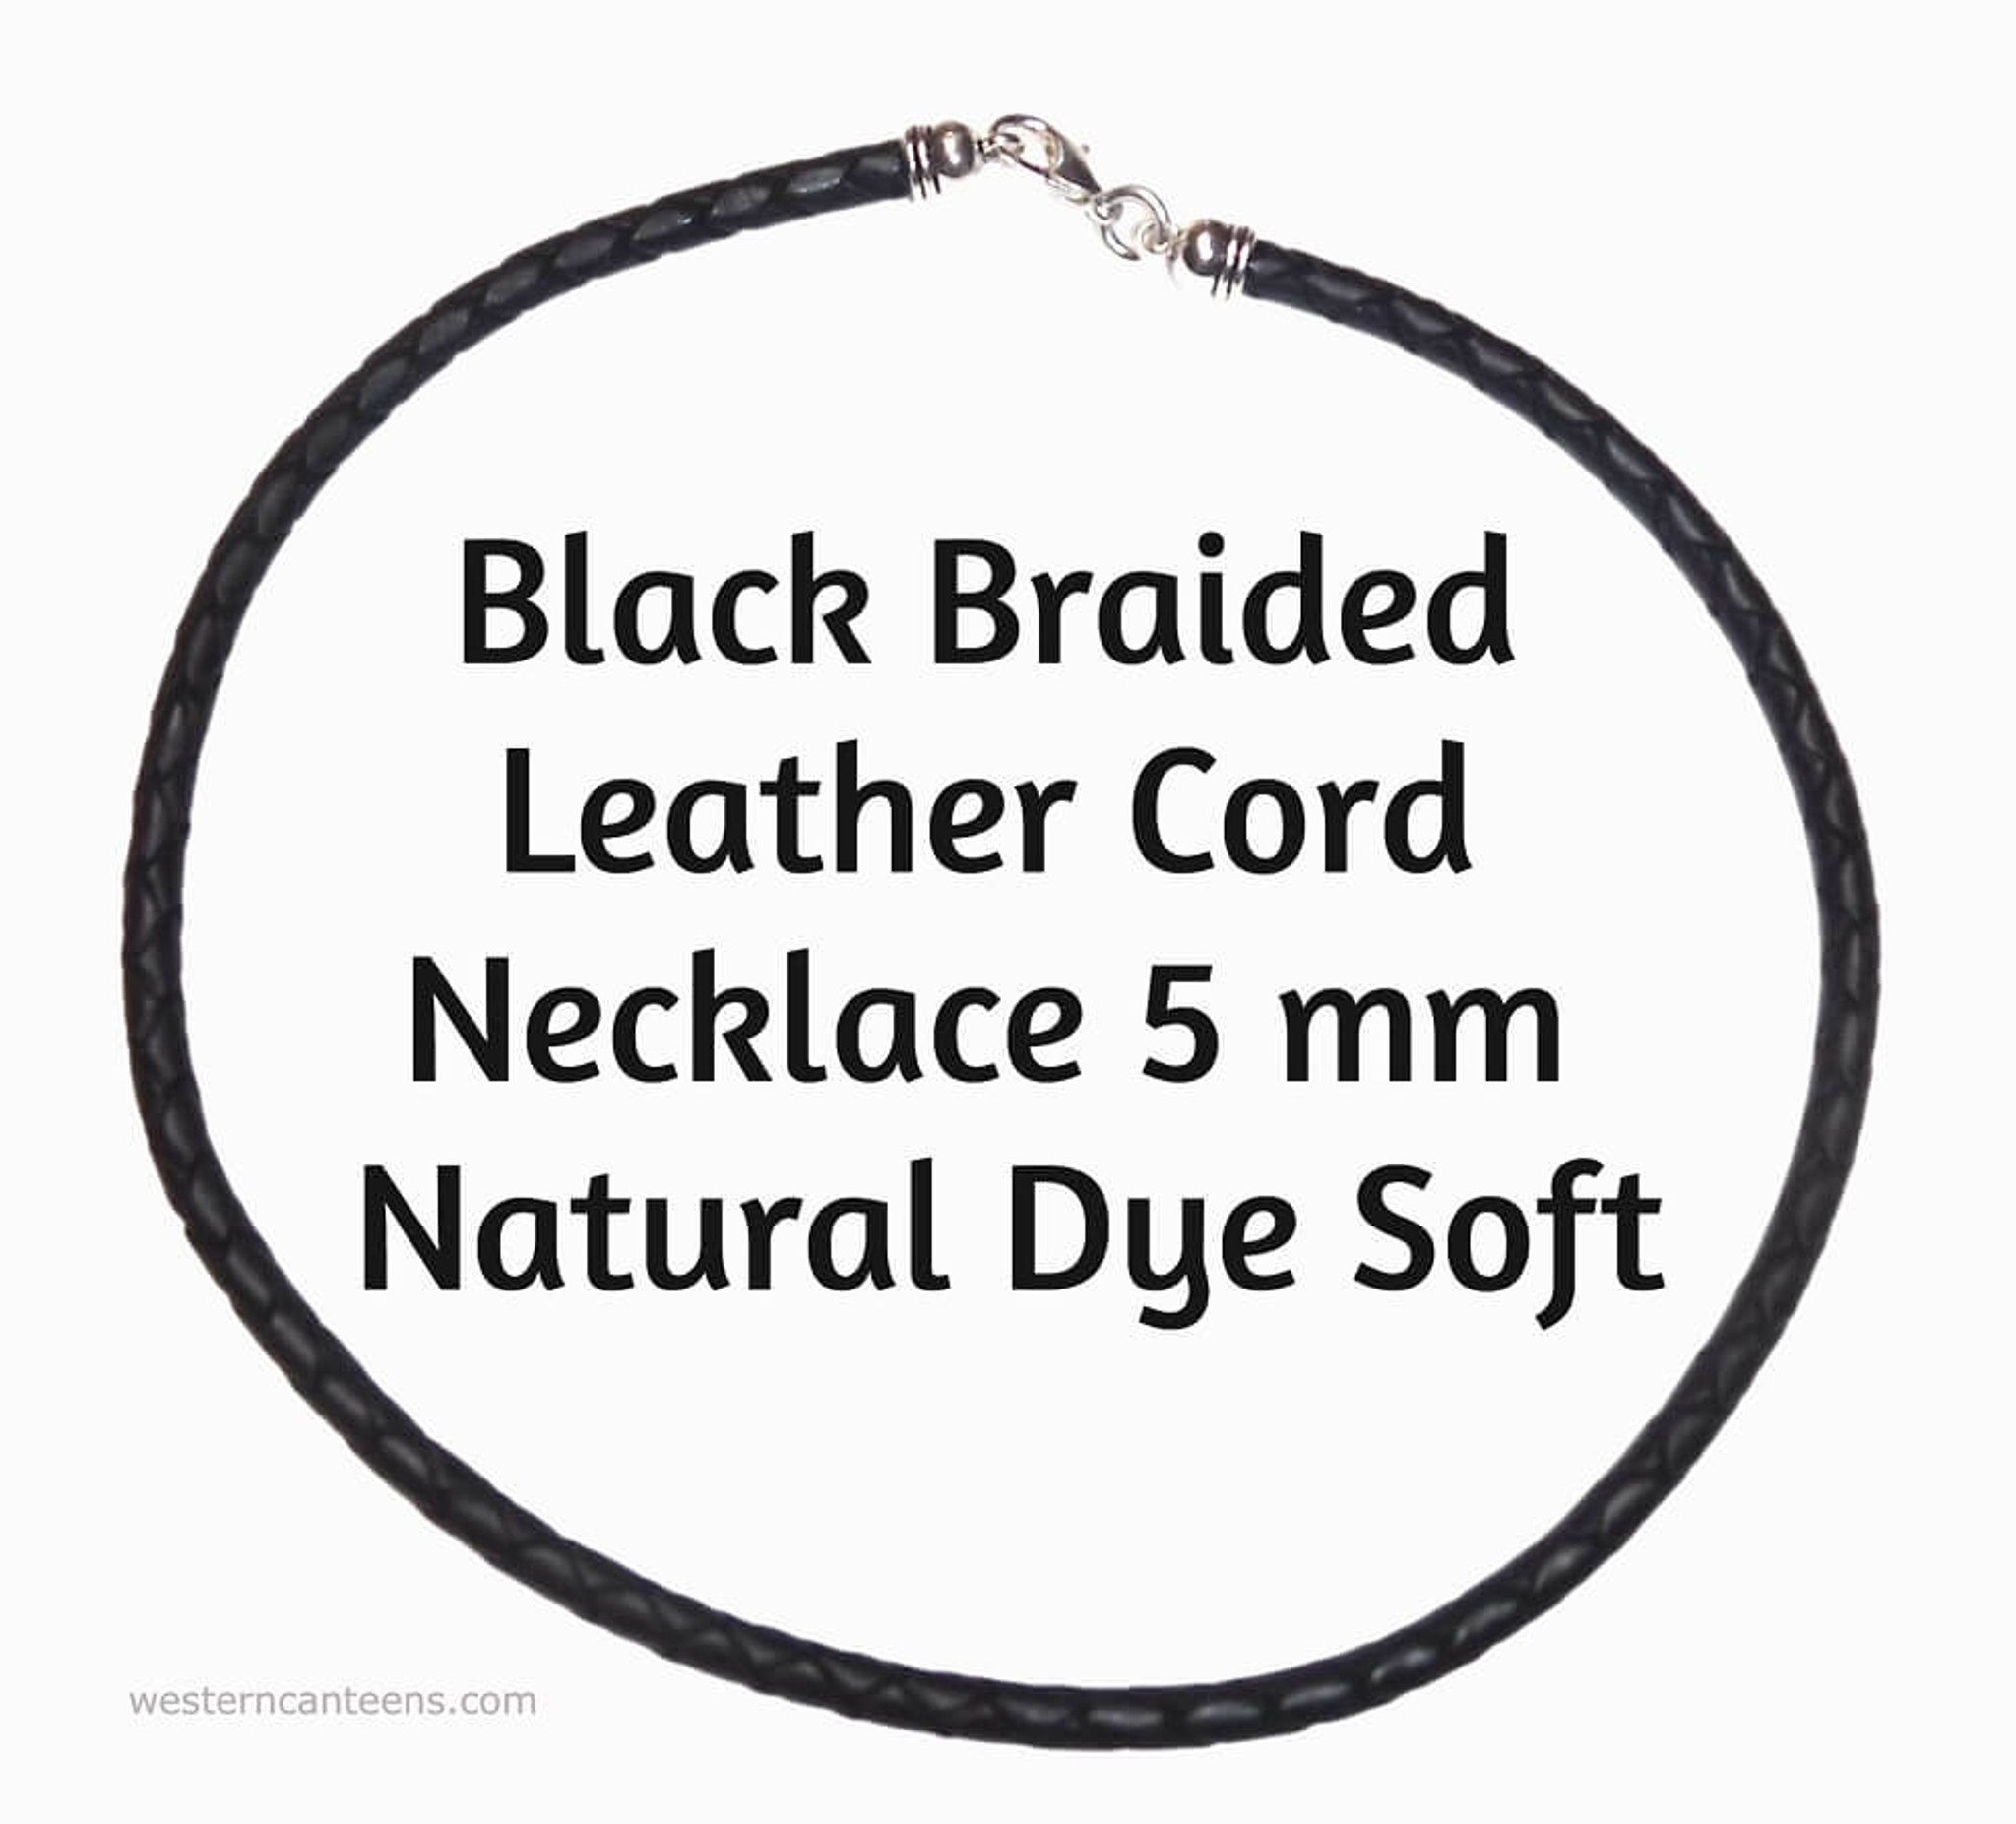 Leather Cord Necklace Black Braided 4 MM - Sizes 14-28 - Western